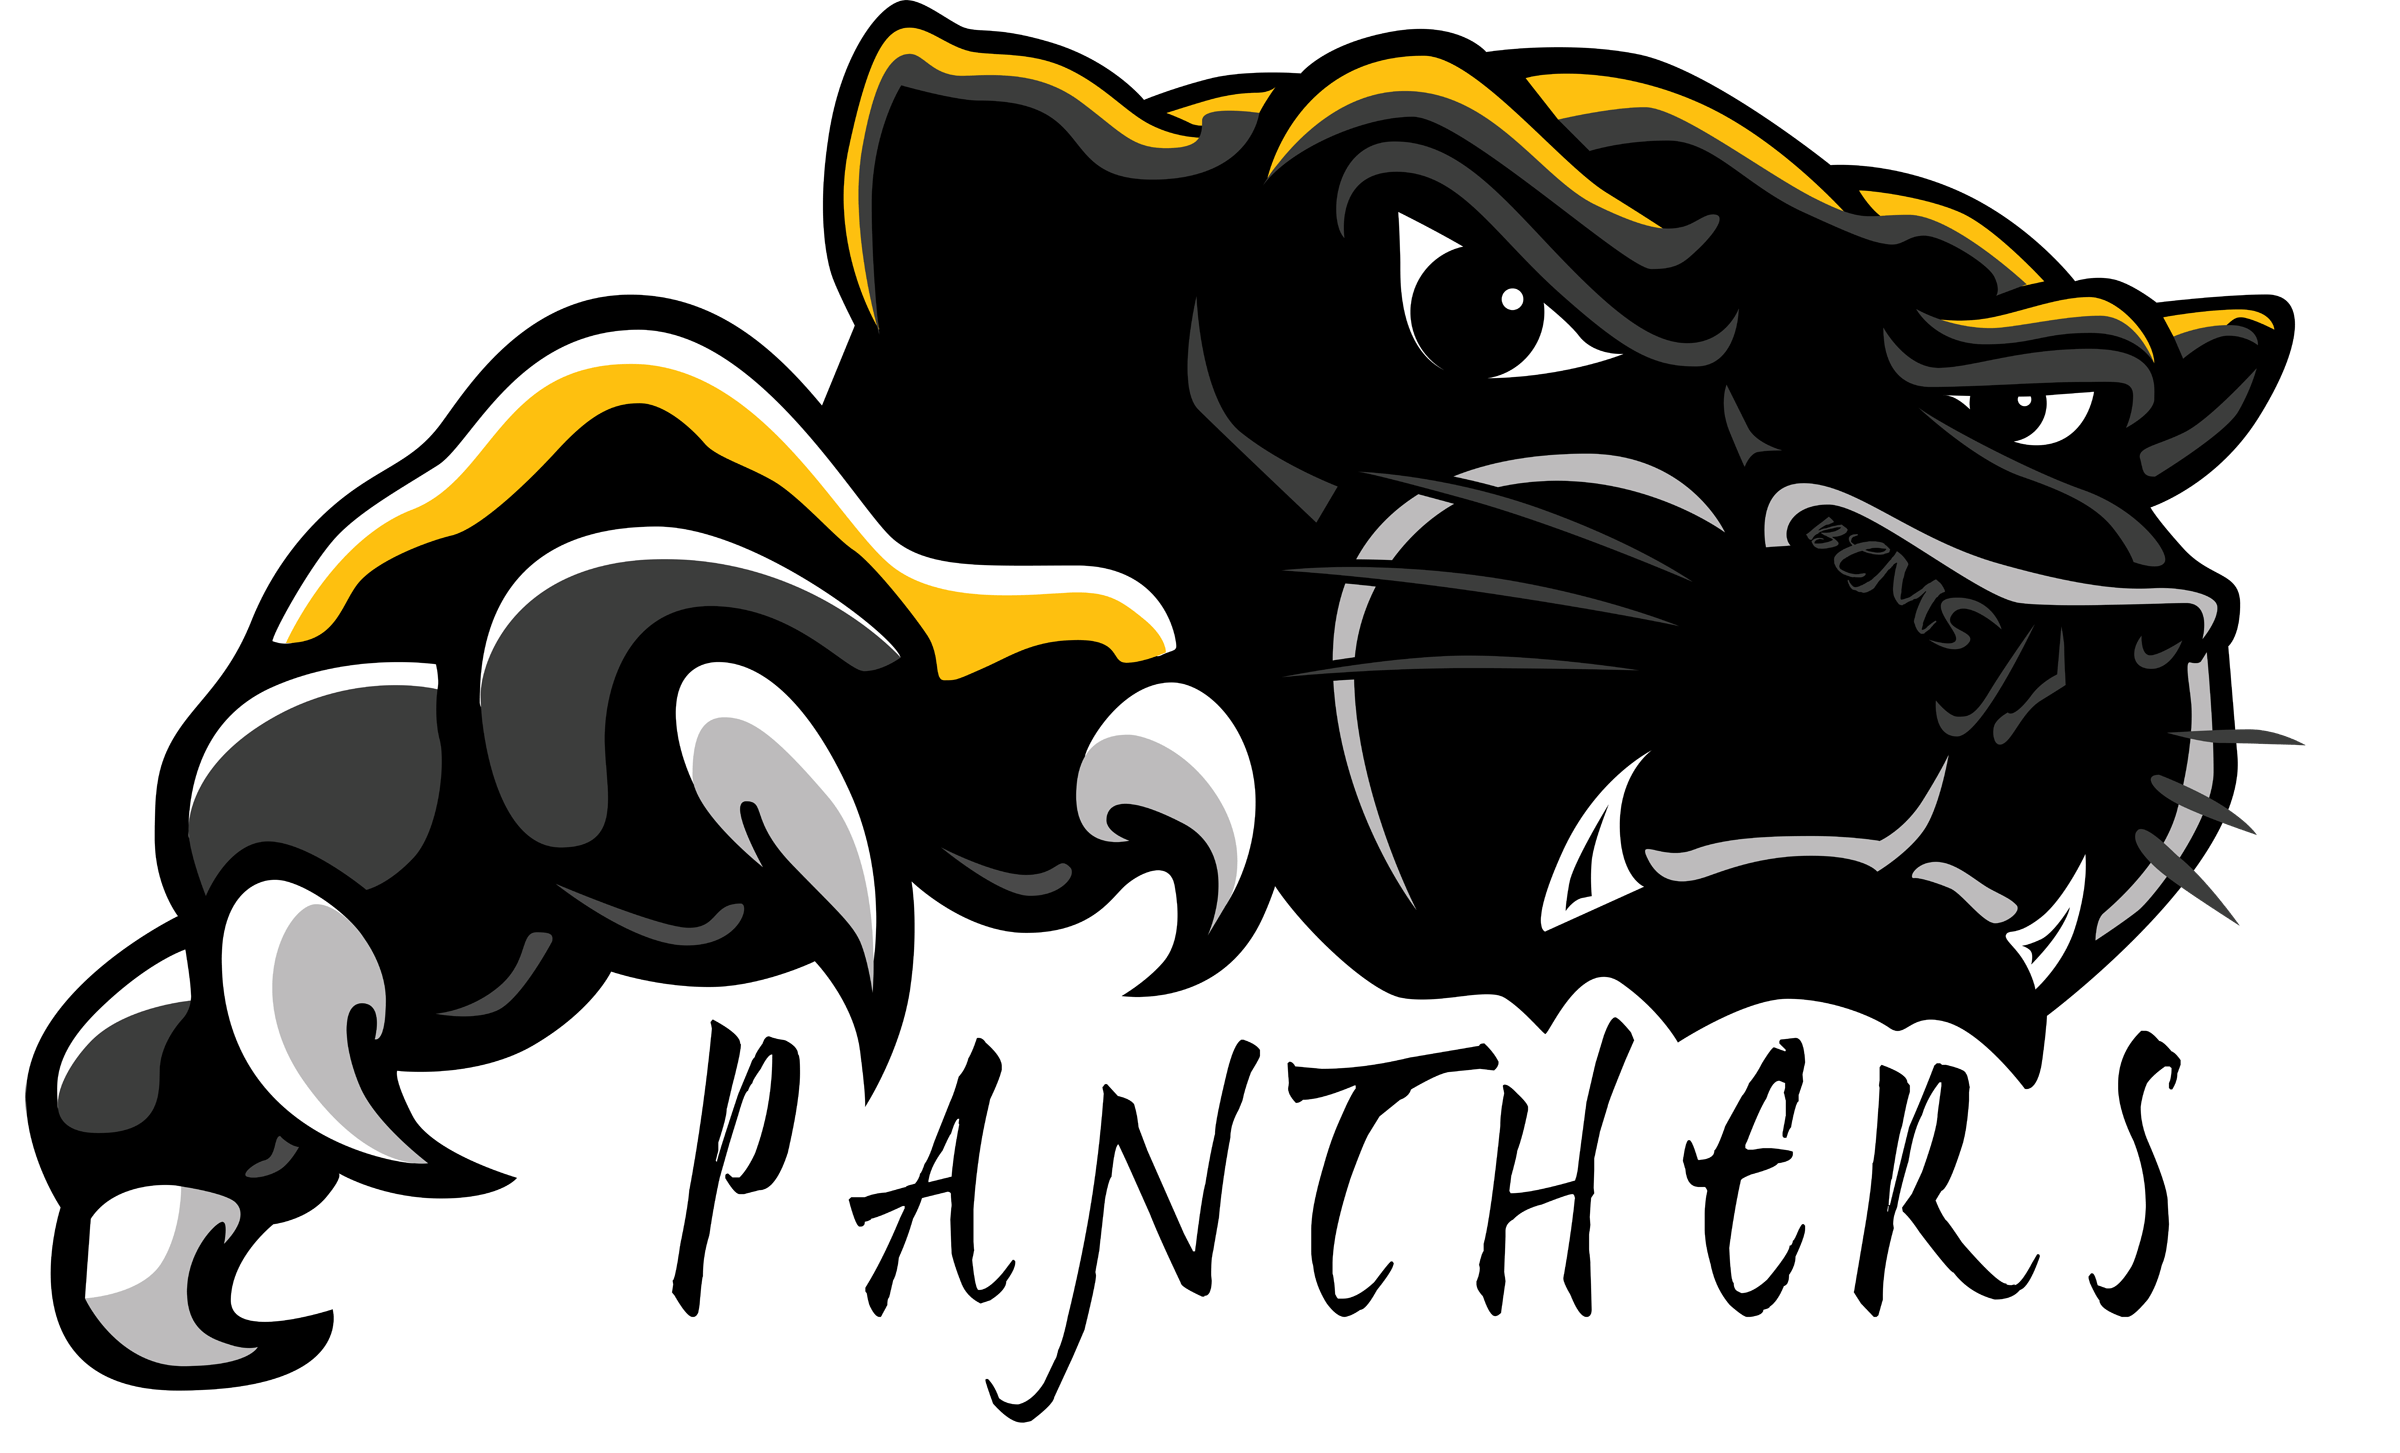 Cute Panther Logo - Free Panther Clipart Picture. ANIMALS. Panther logo